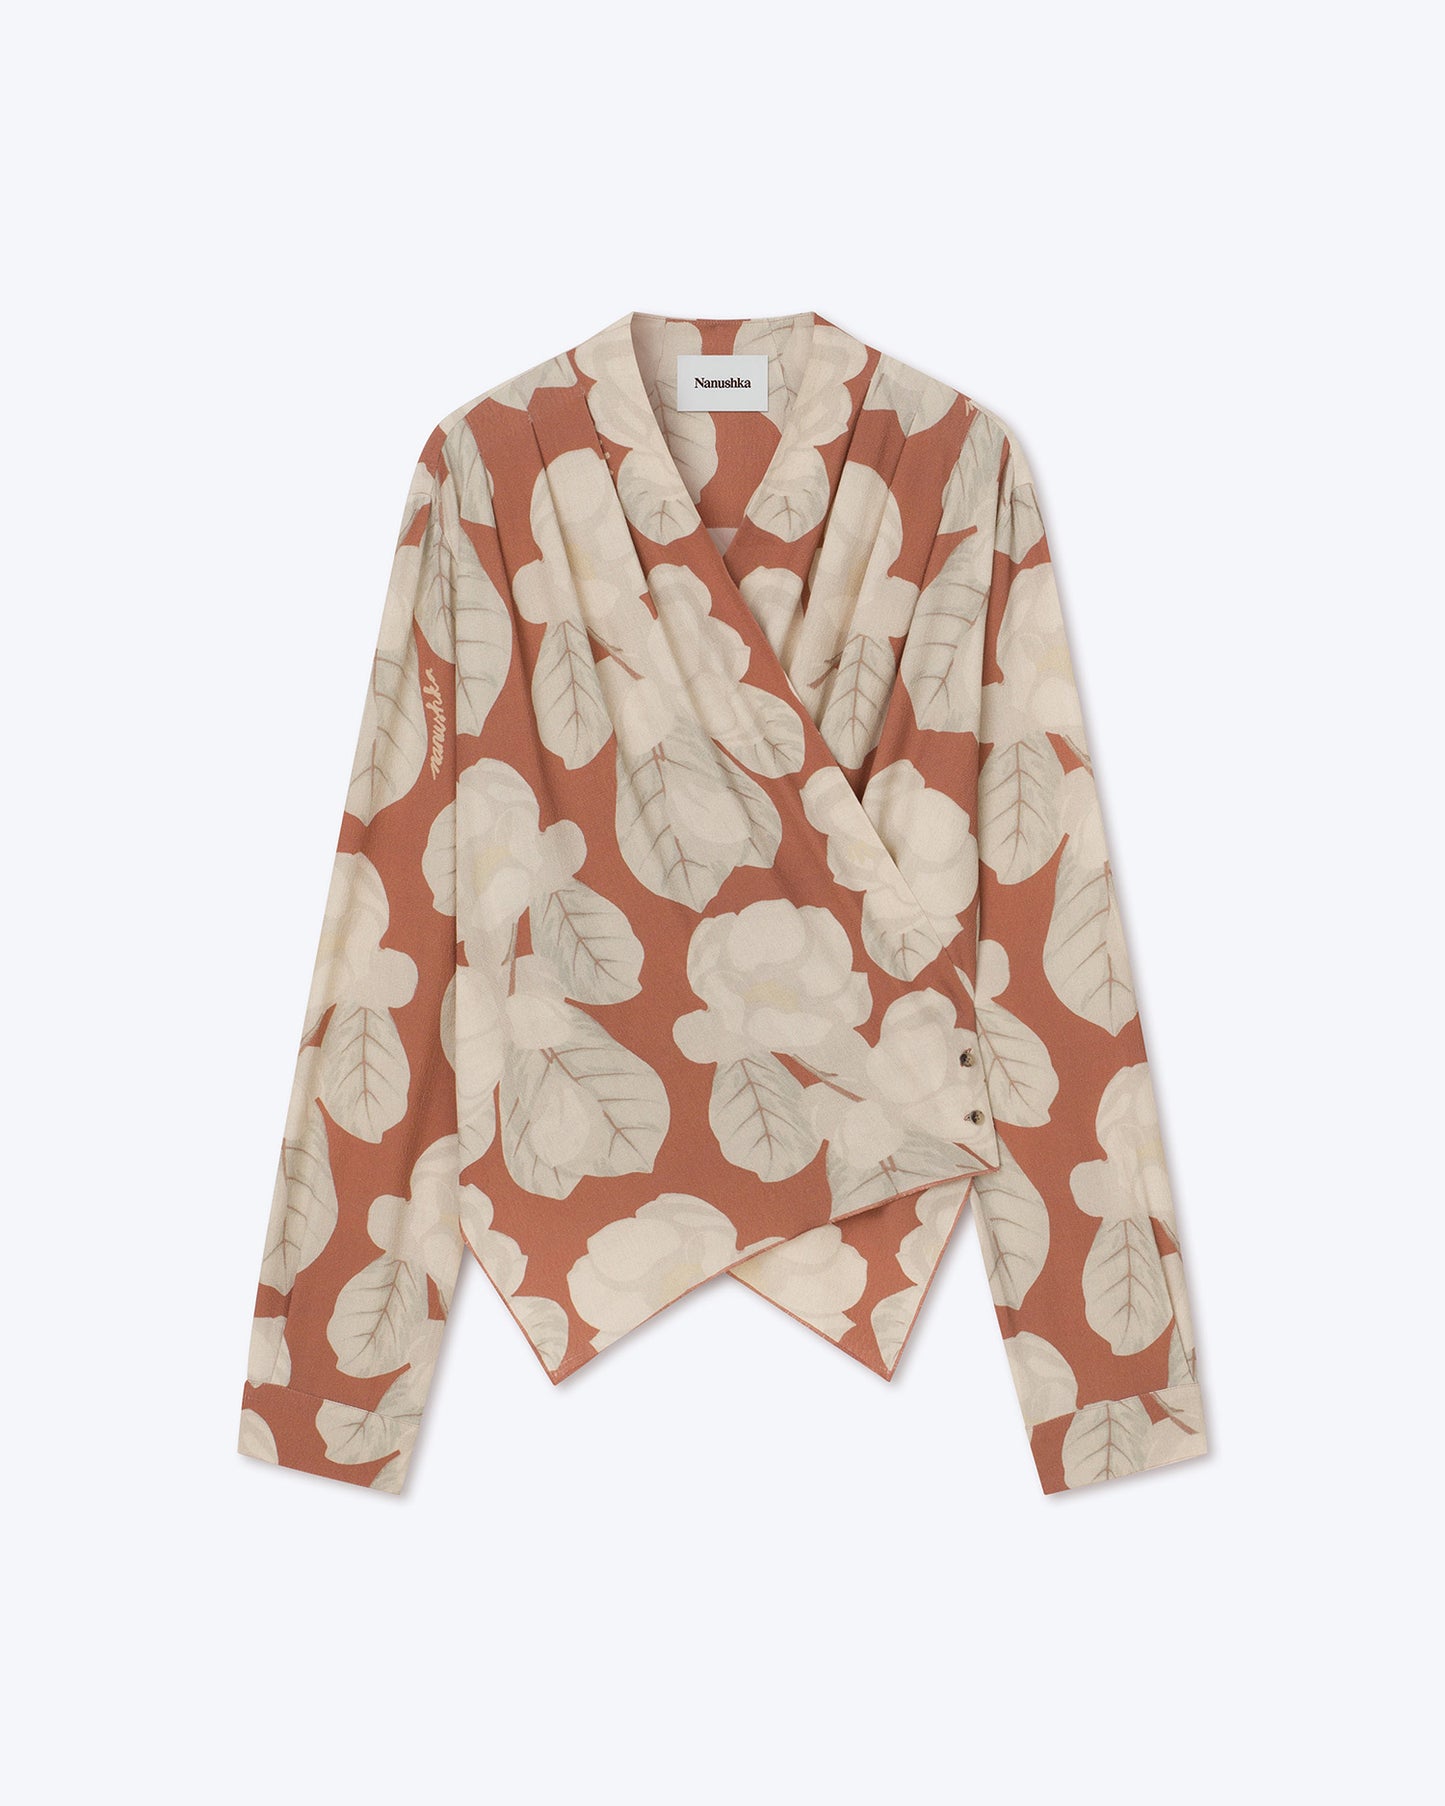 Saco - Archive Lightweight Printed Top - Faded Magnolia